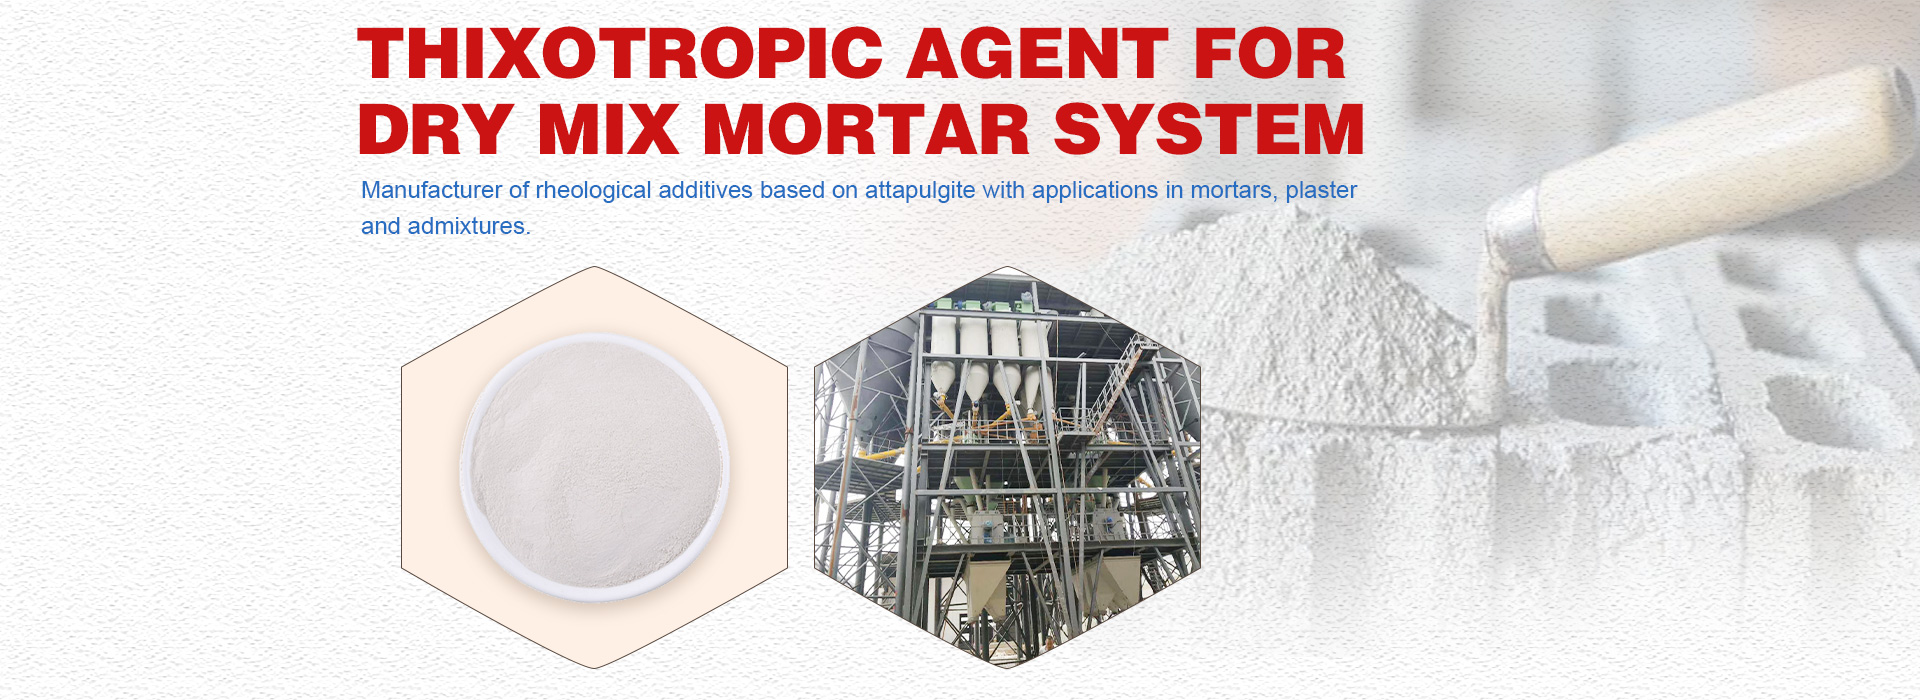 Rheology Modifier Mopdified Anti-sagging Agent Powder 5000CPS attapulgite clay small Particle Size Colloidal Silica inorganic gel Suspension agent